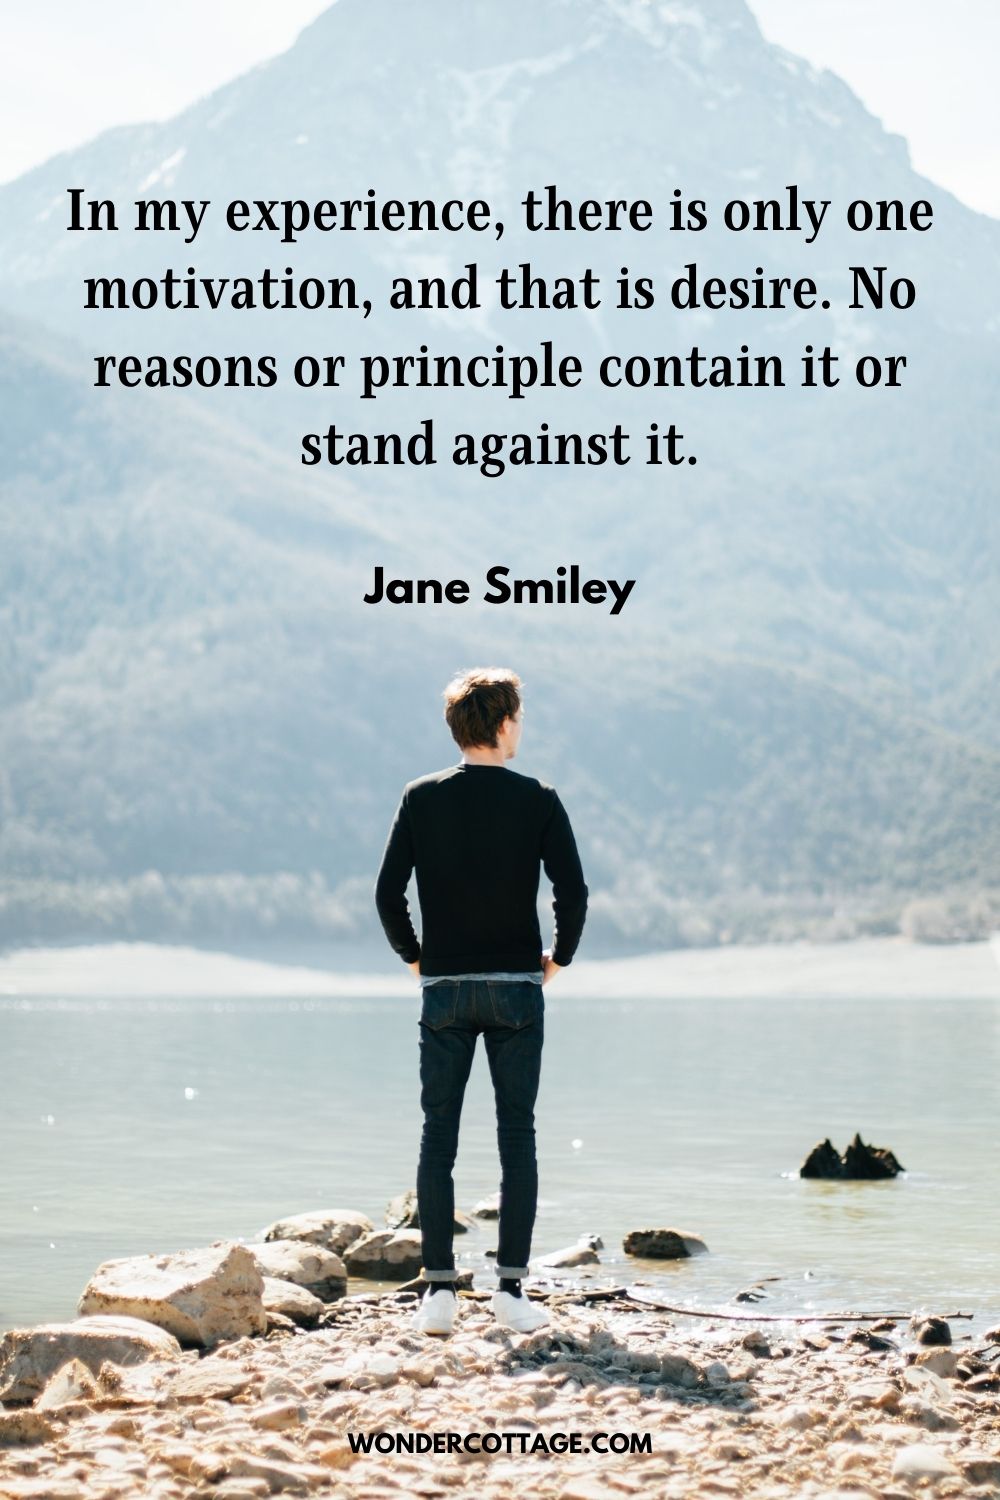 In my experience, there is only one motivation, and that is desire. No reasons or principle contain it or stand against it." Jane Smiley